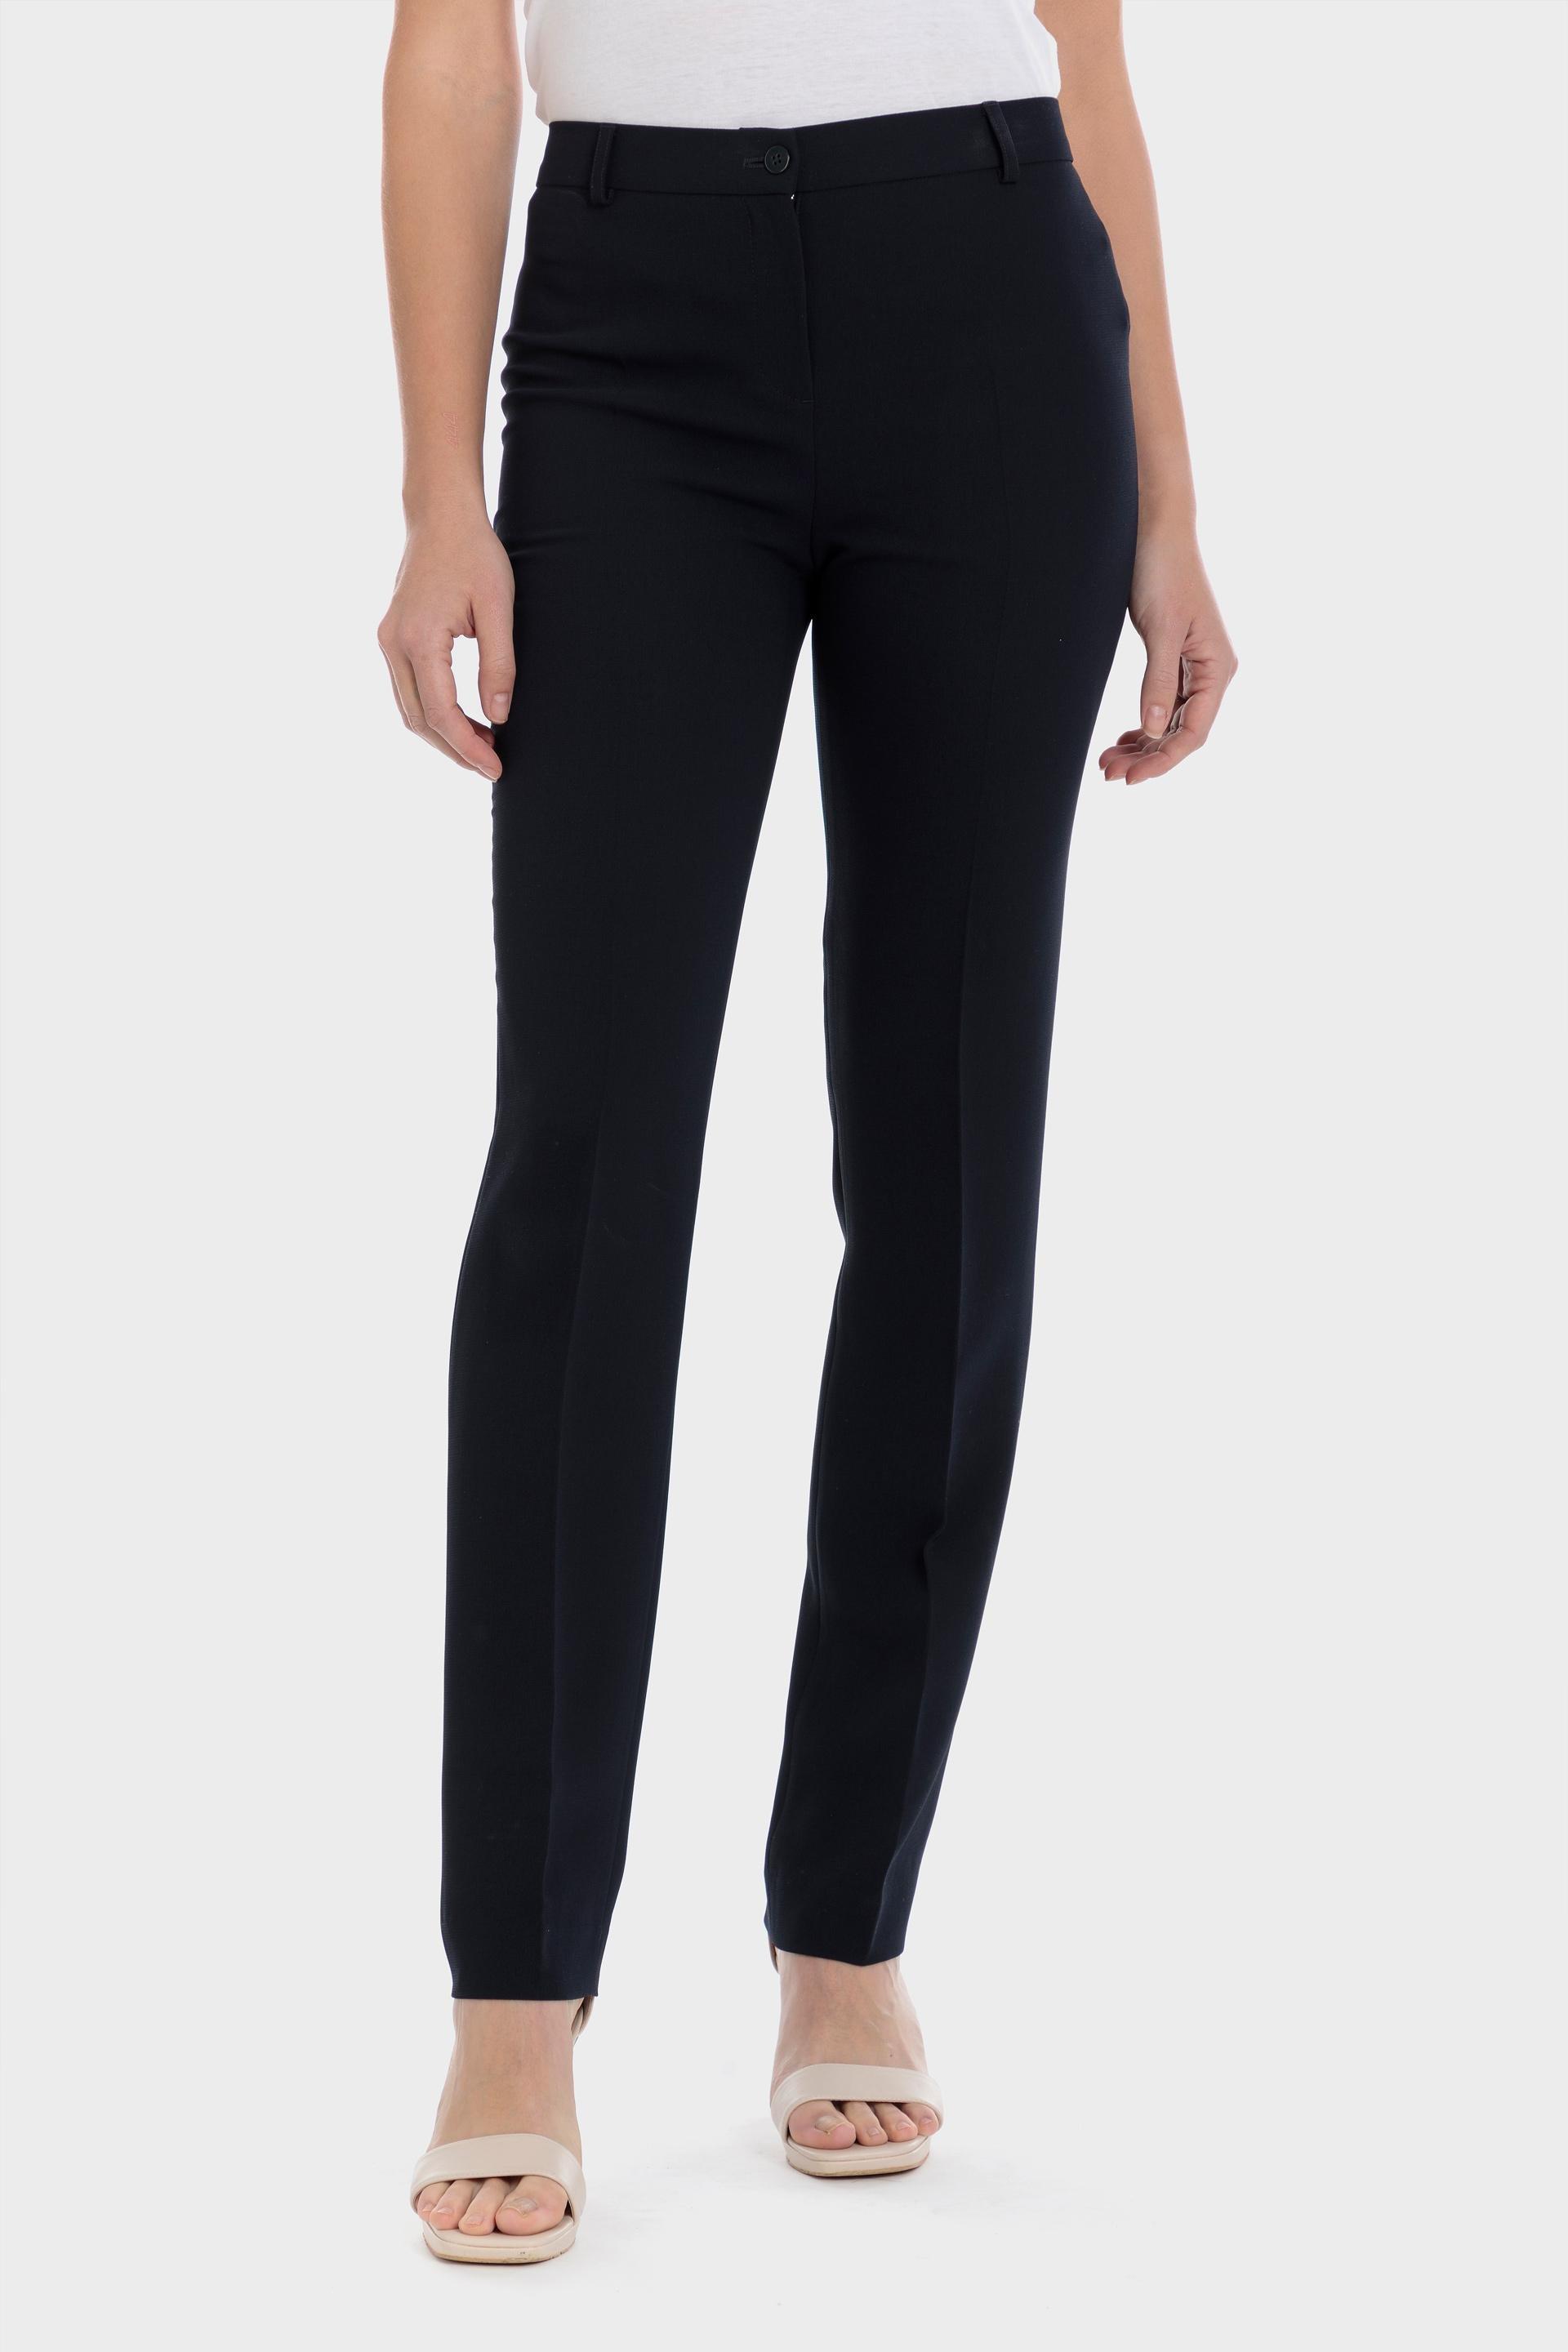 Punt Roma - Navy Crepe Trousers With Elastic